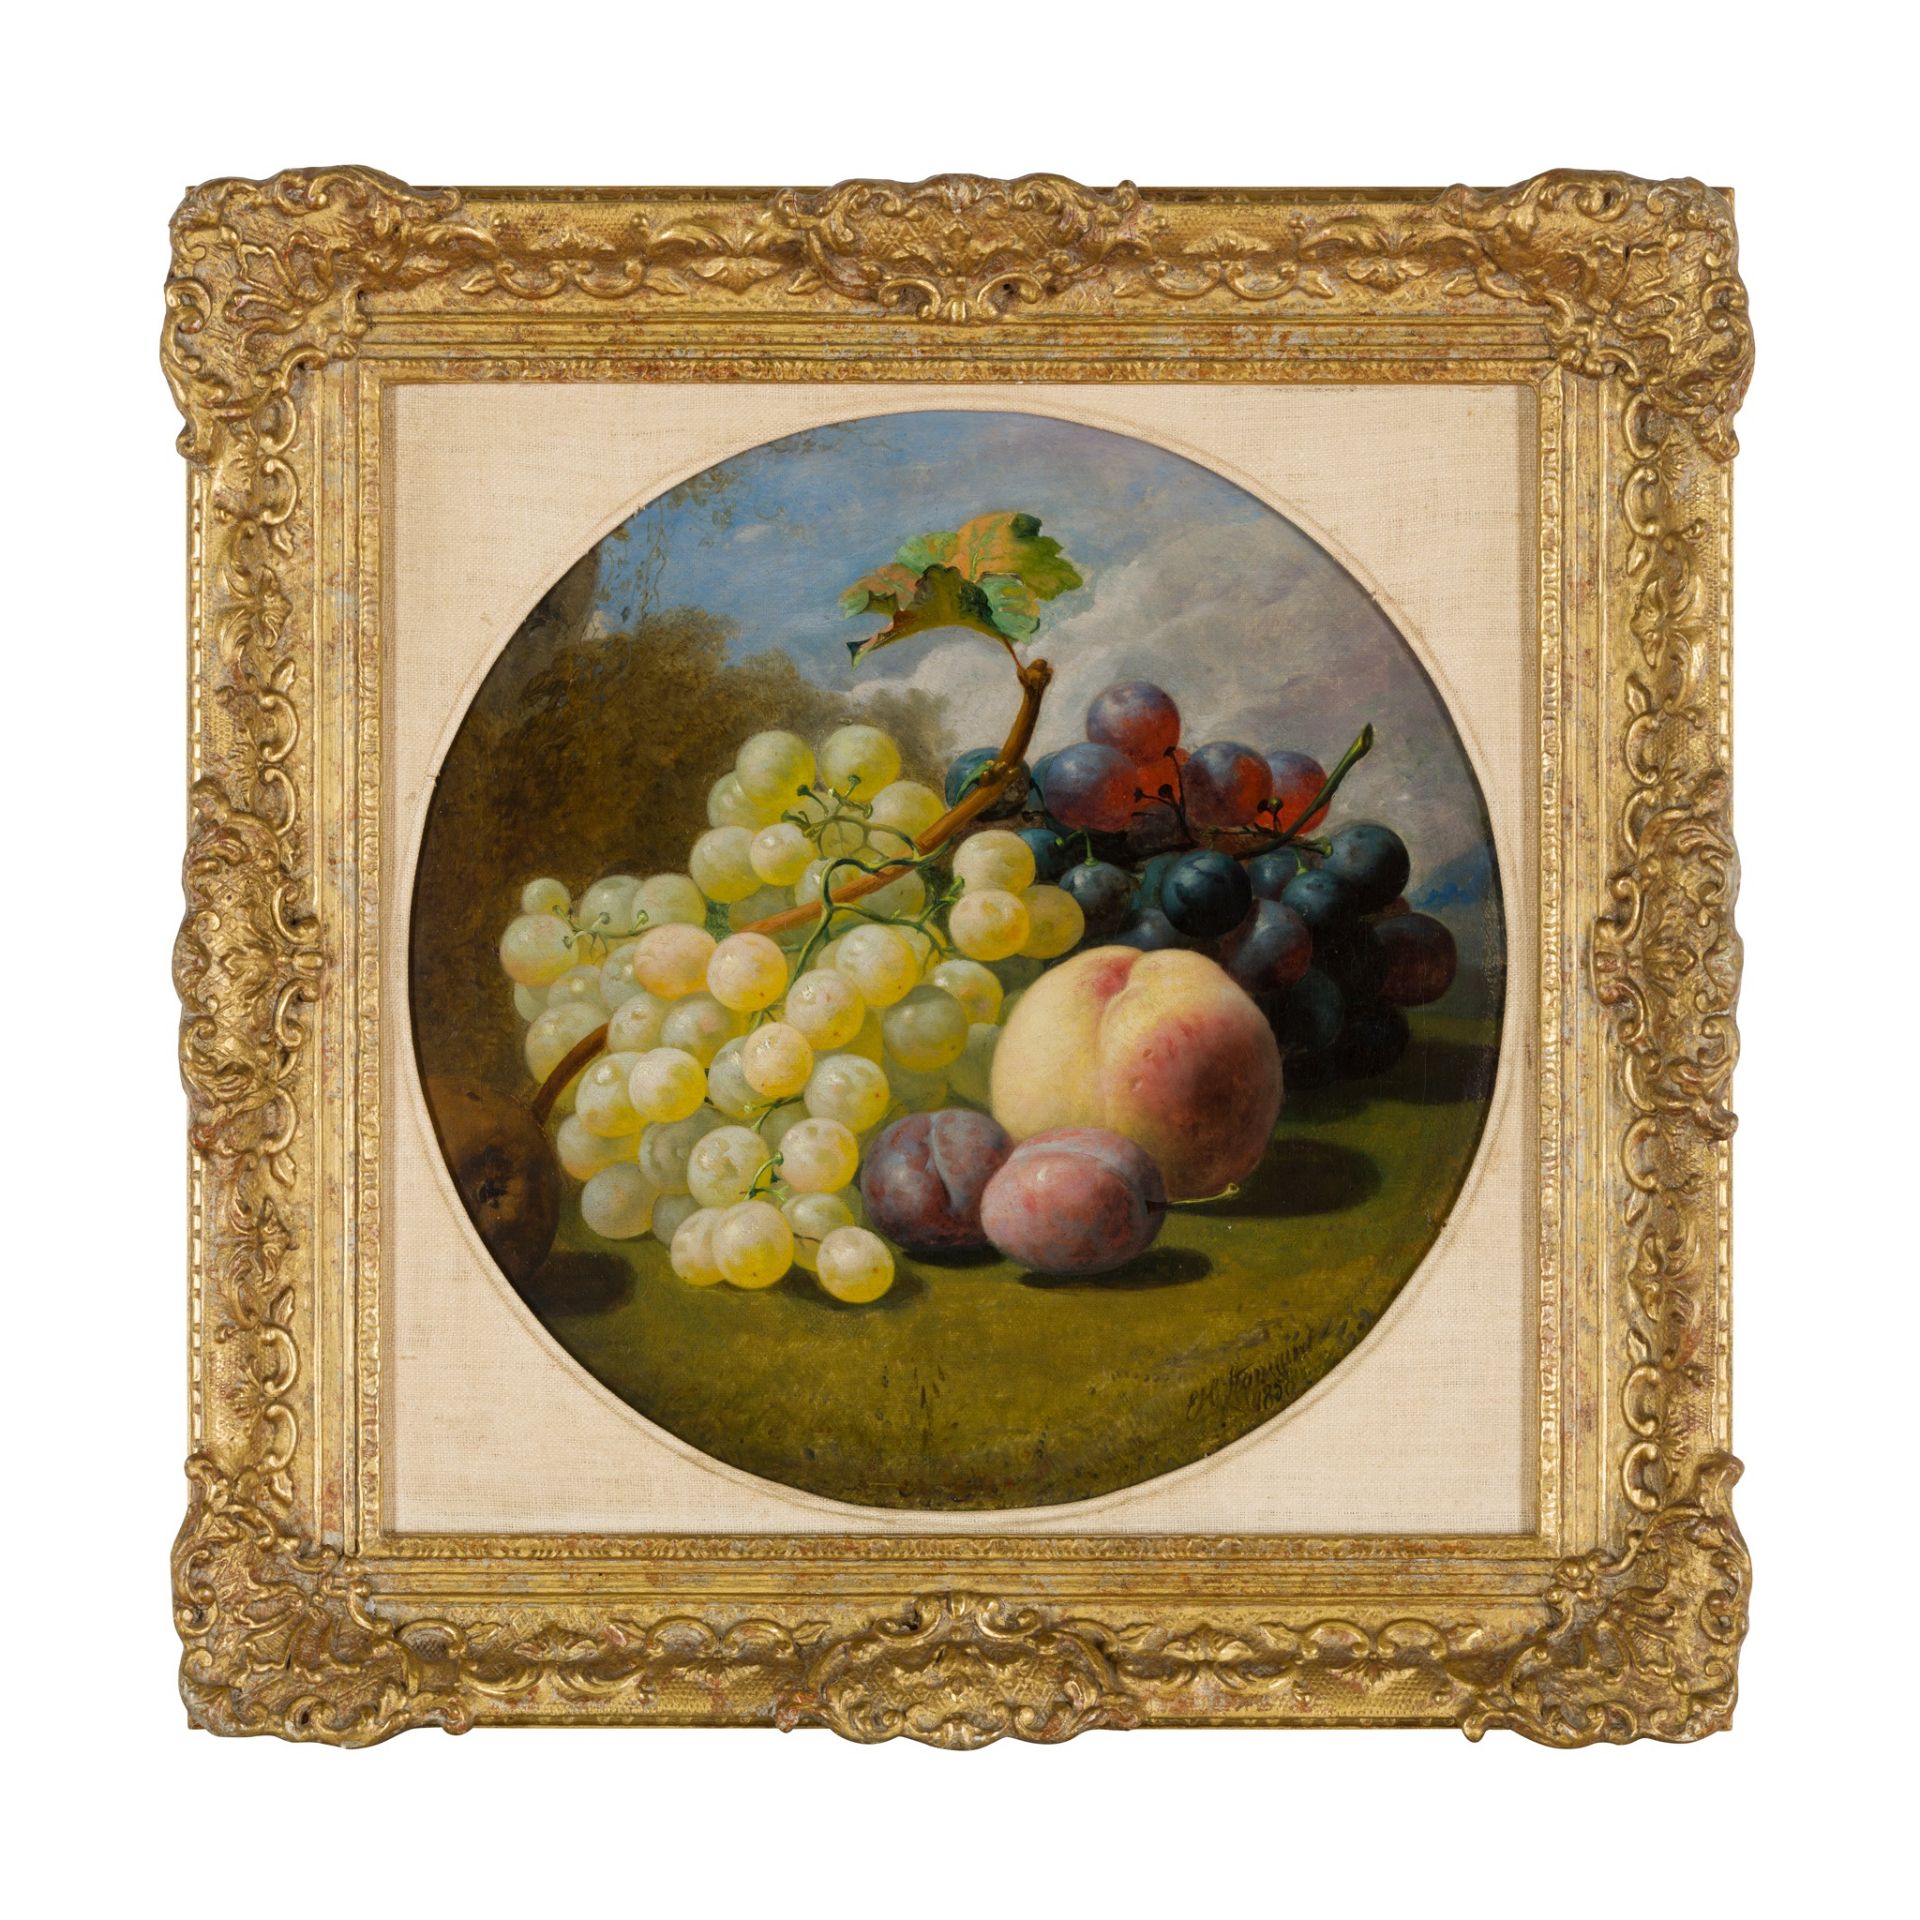 ELOISE HARRIET STANNARD (BRITISH 1828-1915) STILL LIFE OF ASSORTED FRUIT ON A BANK - Image 2 of 3